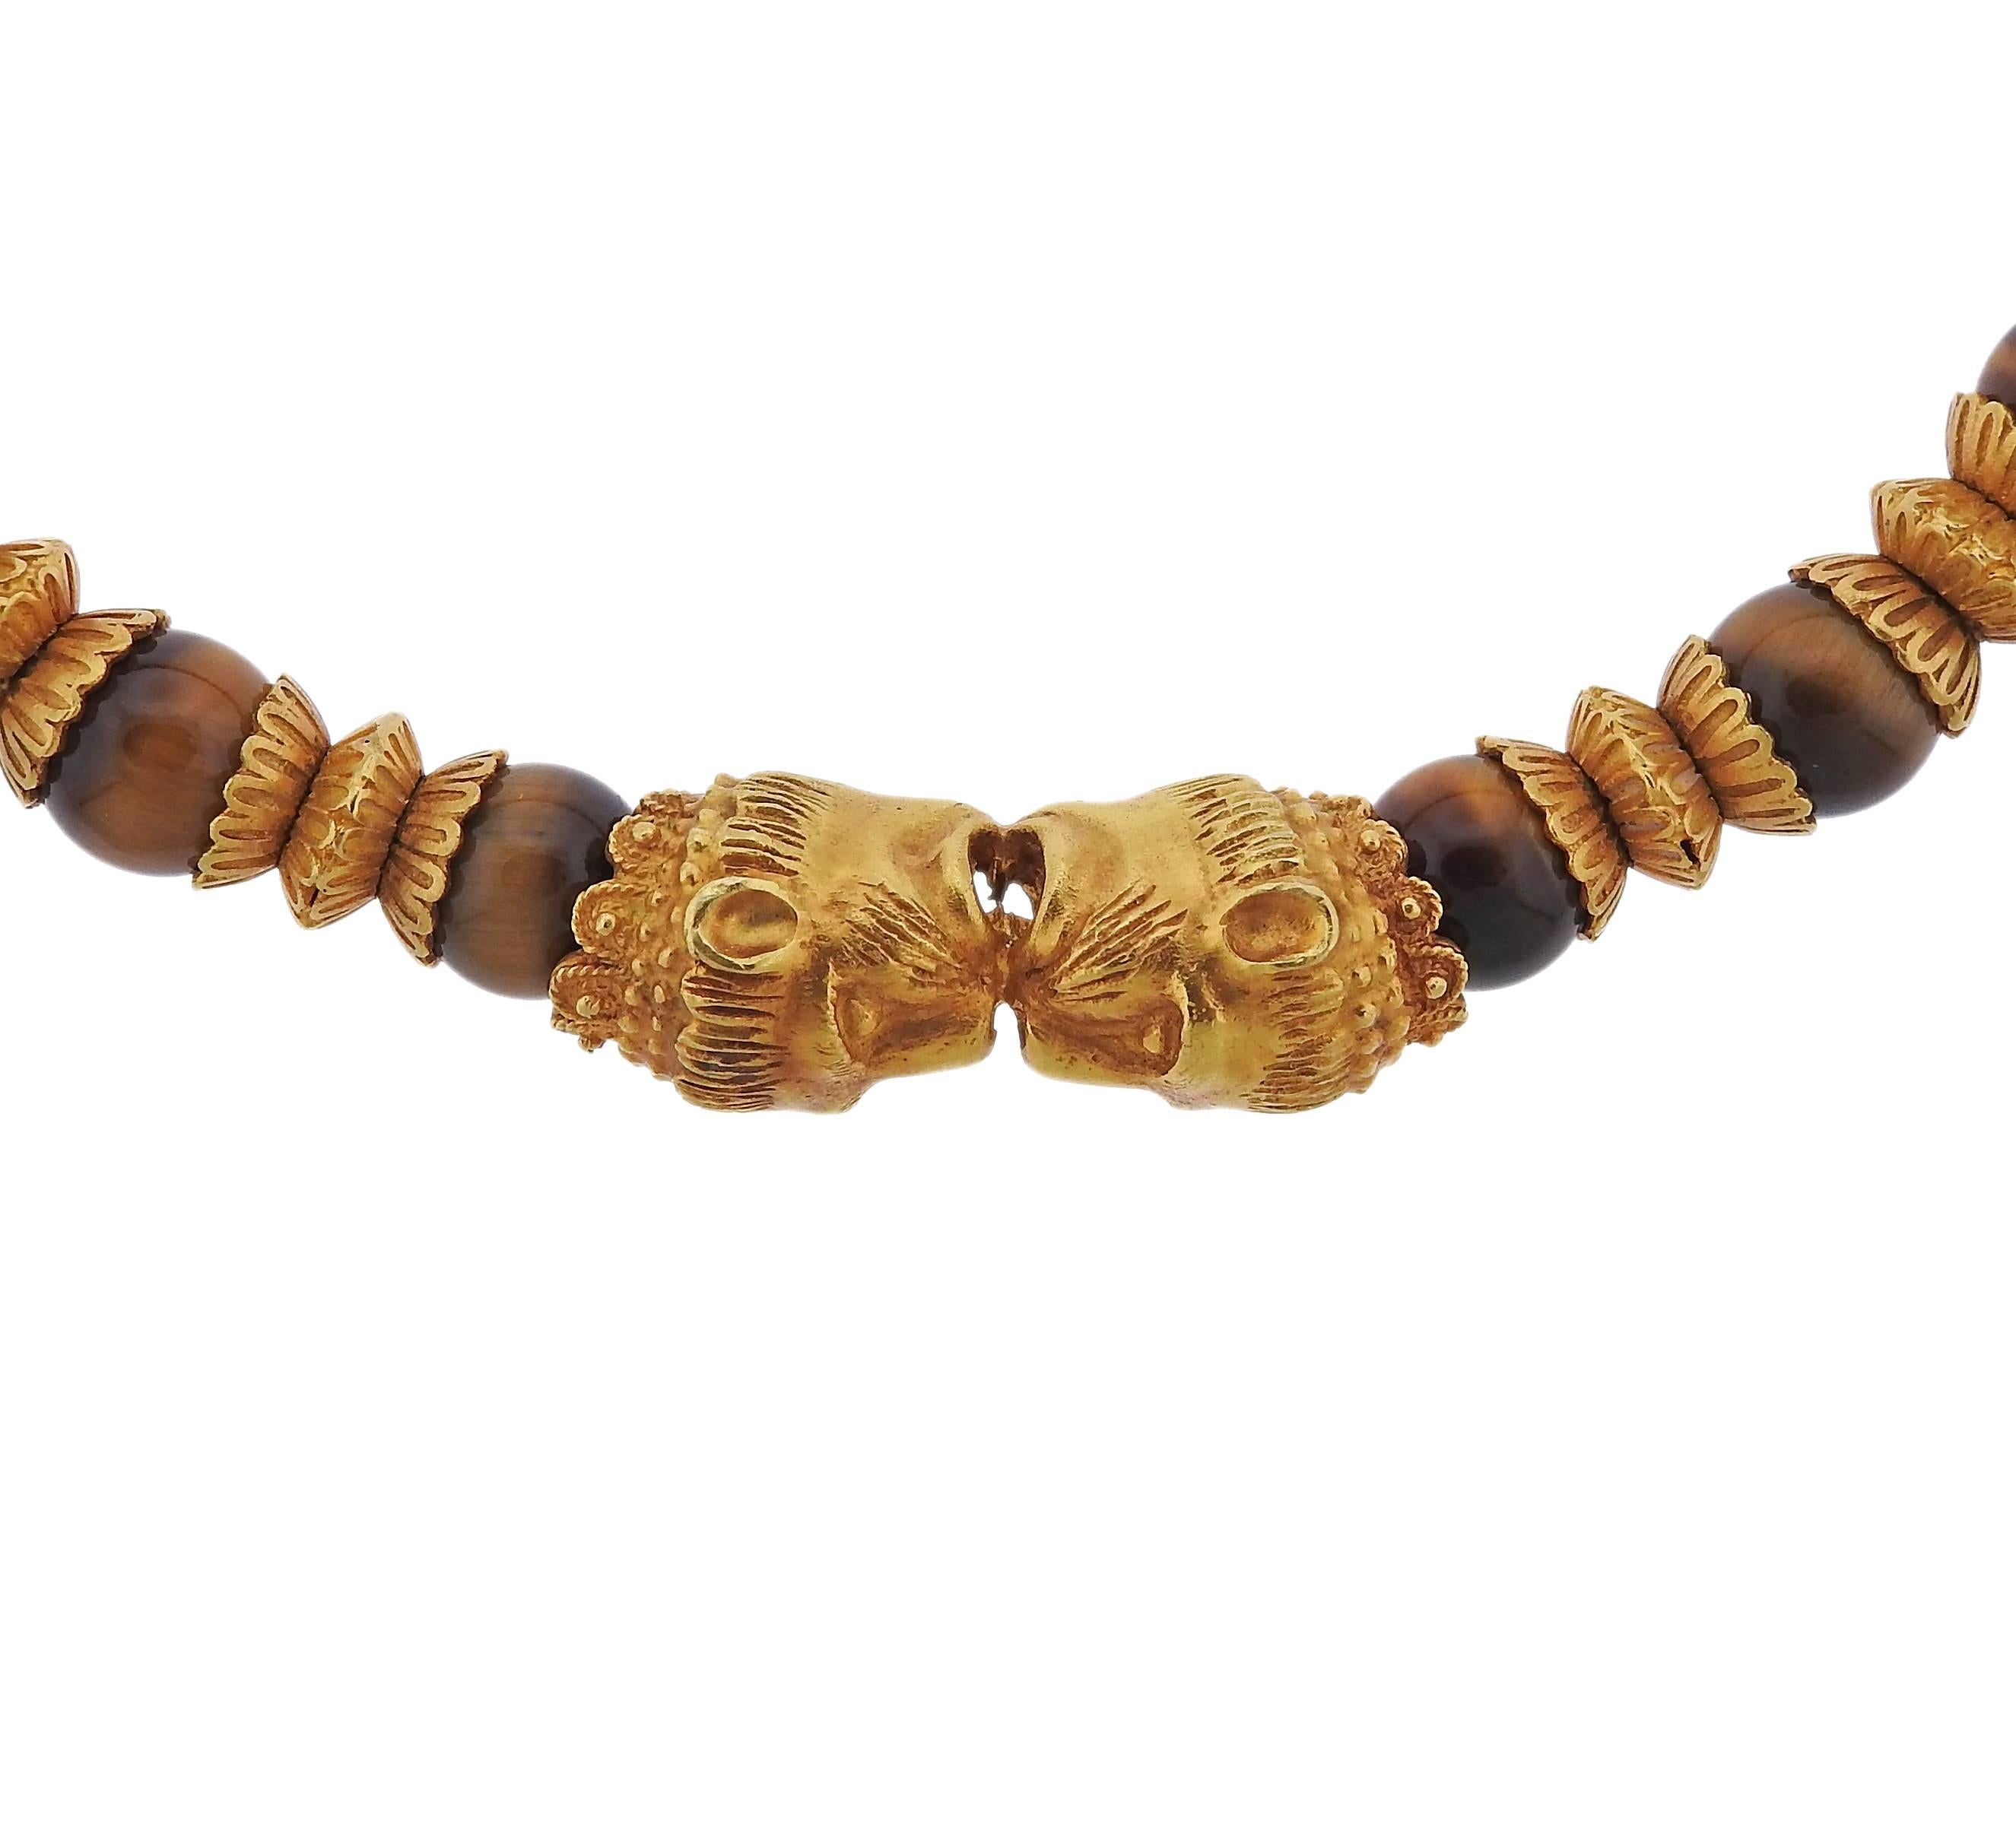 22k gold chimera necklace, crafted by Ilias Lalaounis, set with 10mm tiger's eye beads. Necklace is 15